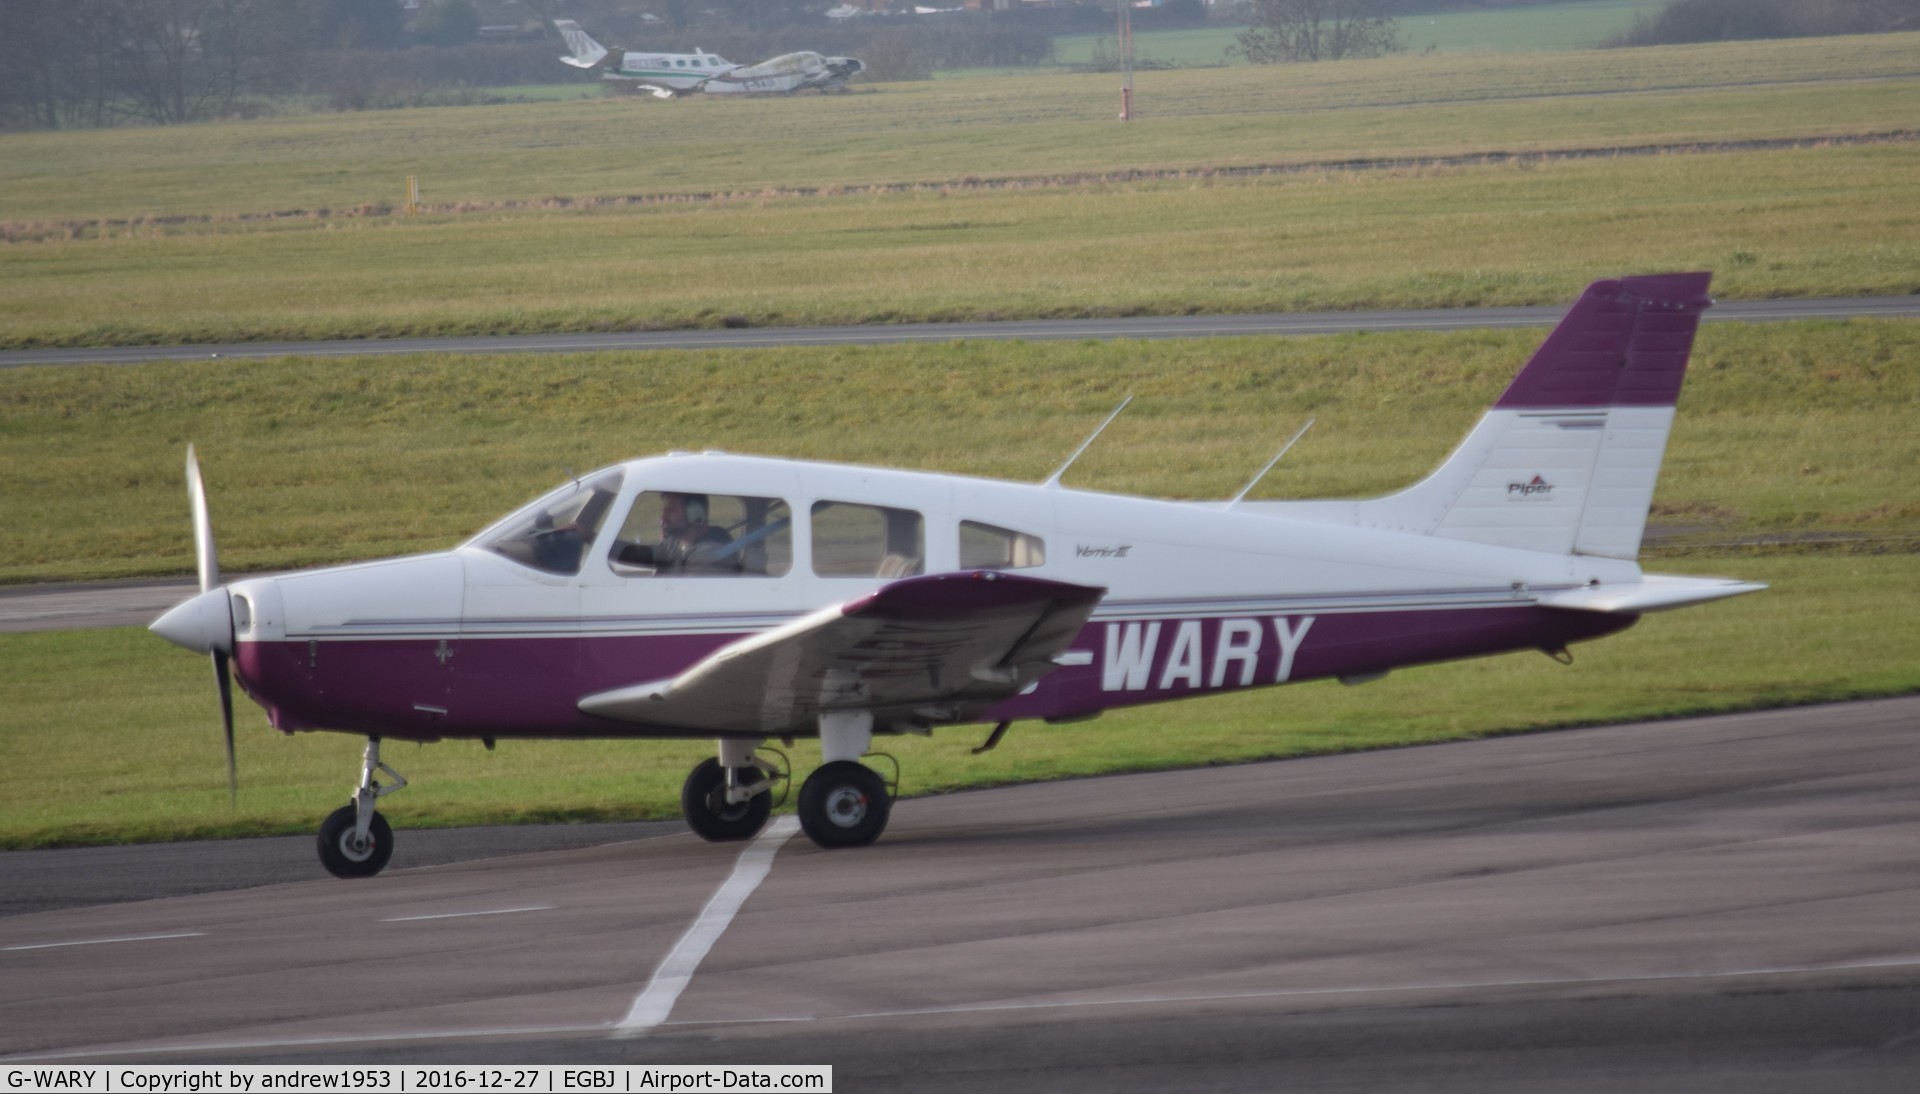 G-WARY, 1997 Piper PA-28-161 Cherokee Warrior III C/N 28-42024, G-WARY at Gloucestershire Airport.